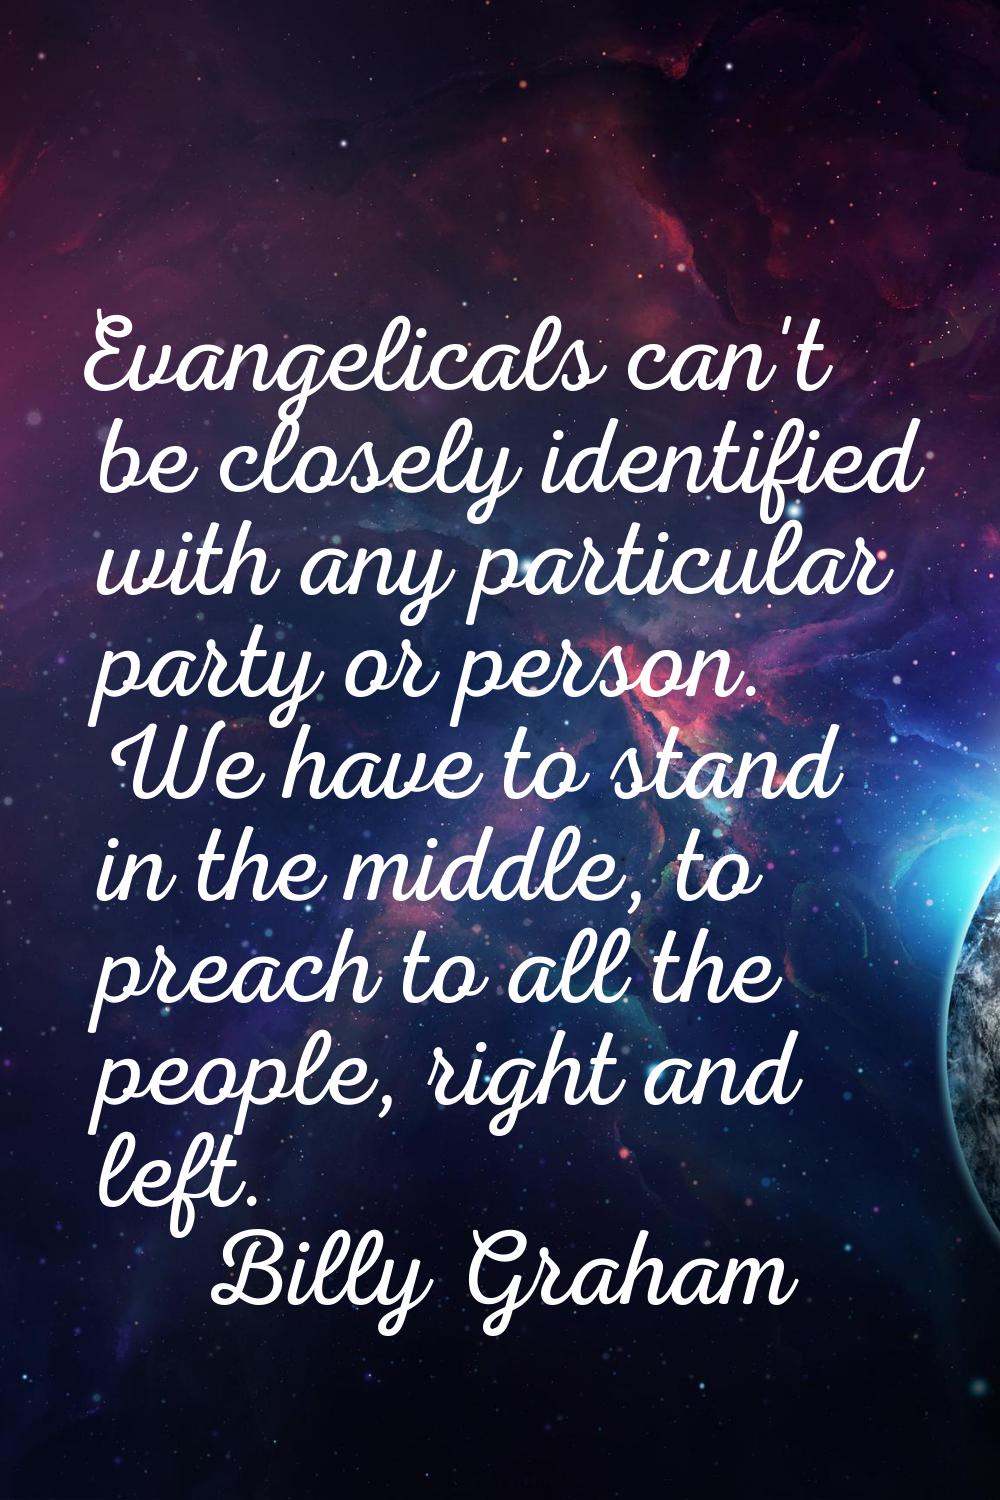 Evangelicals can't be closely identified with any particular party or person. We have to stand in t